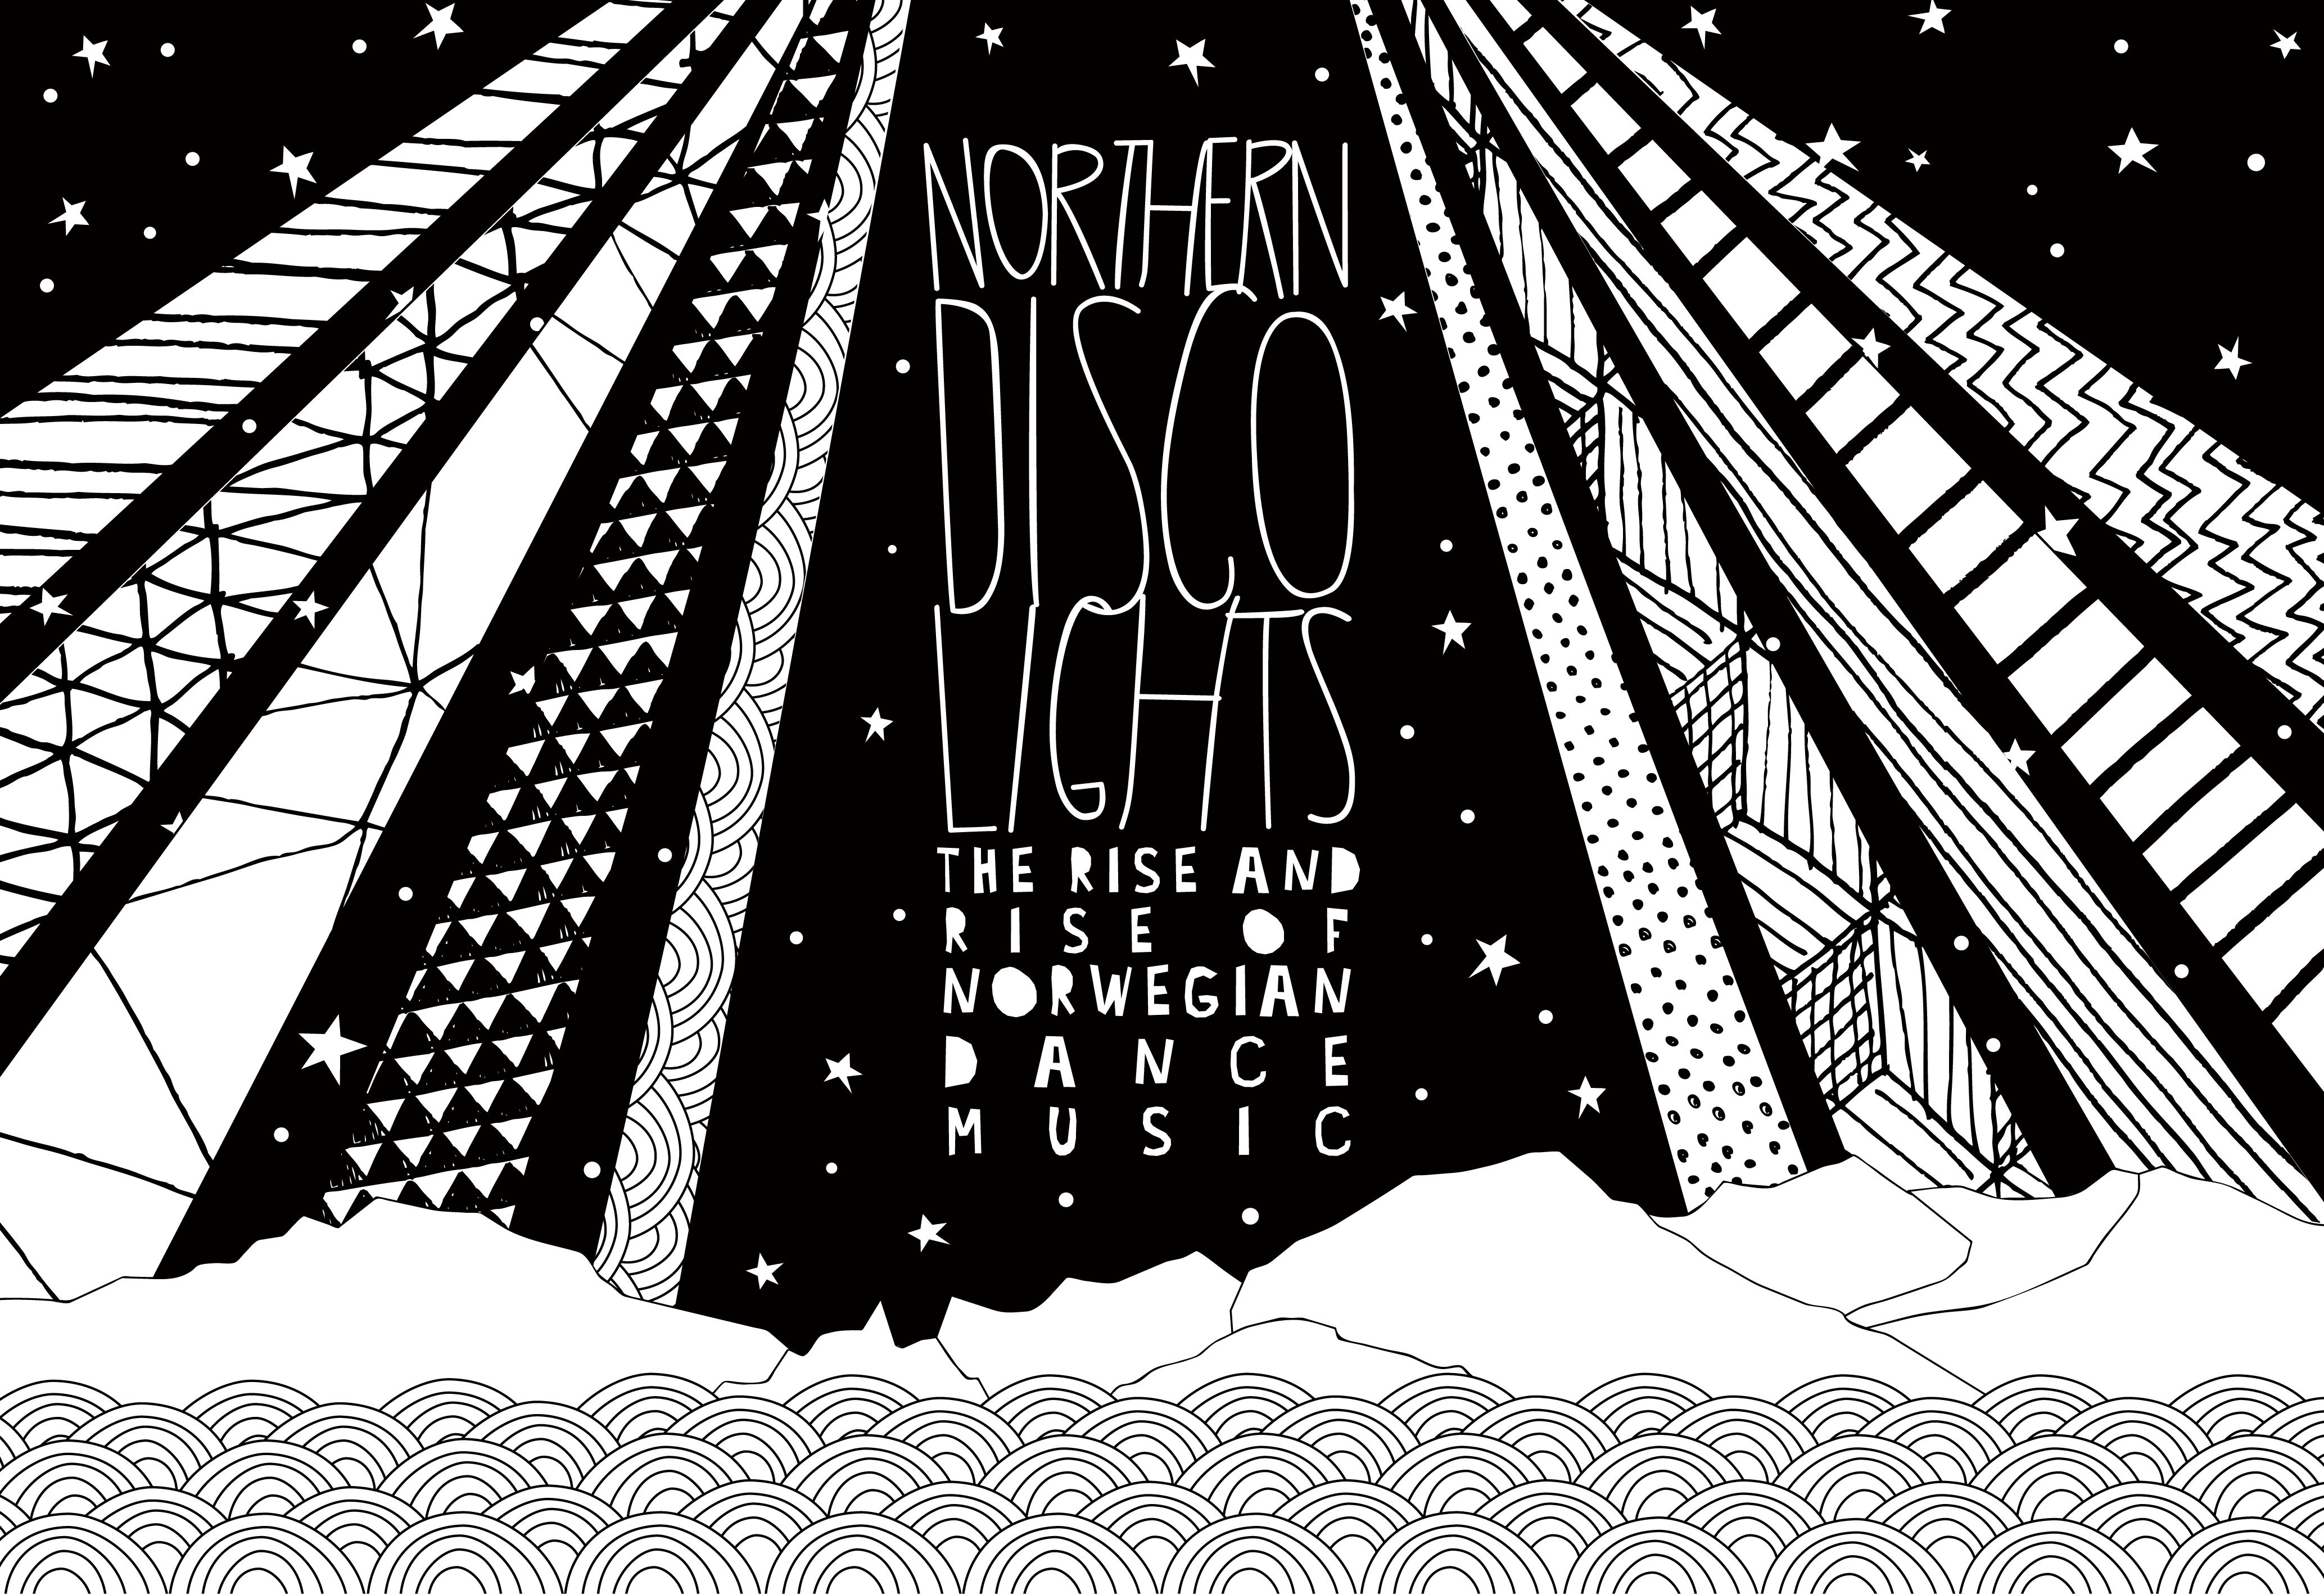 Win! Tickets to the afterparty of ‘Northern Disco Lights’ – with Bjørn Torske & Mental Overdrive!